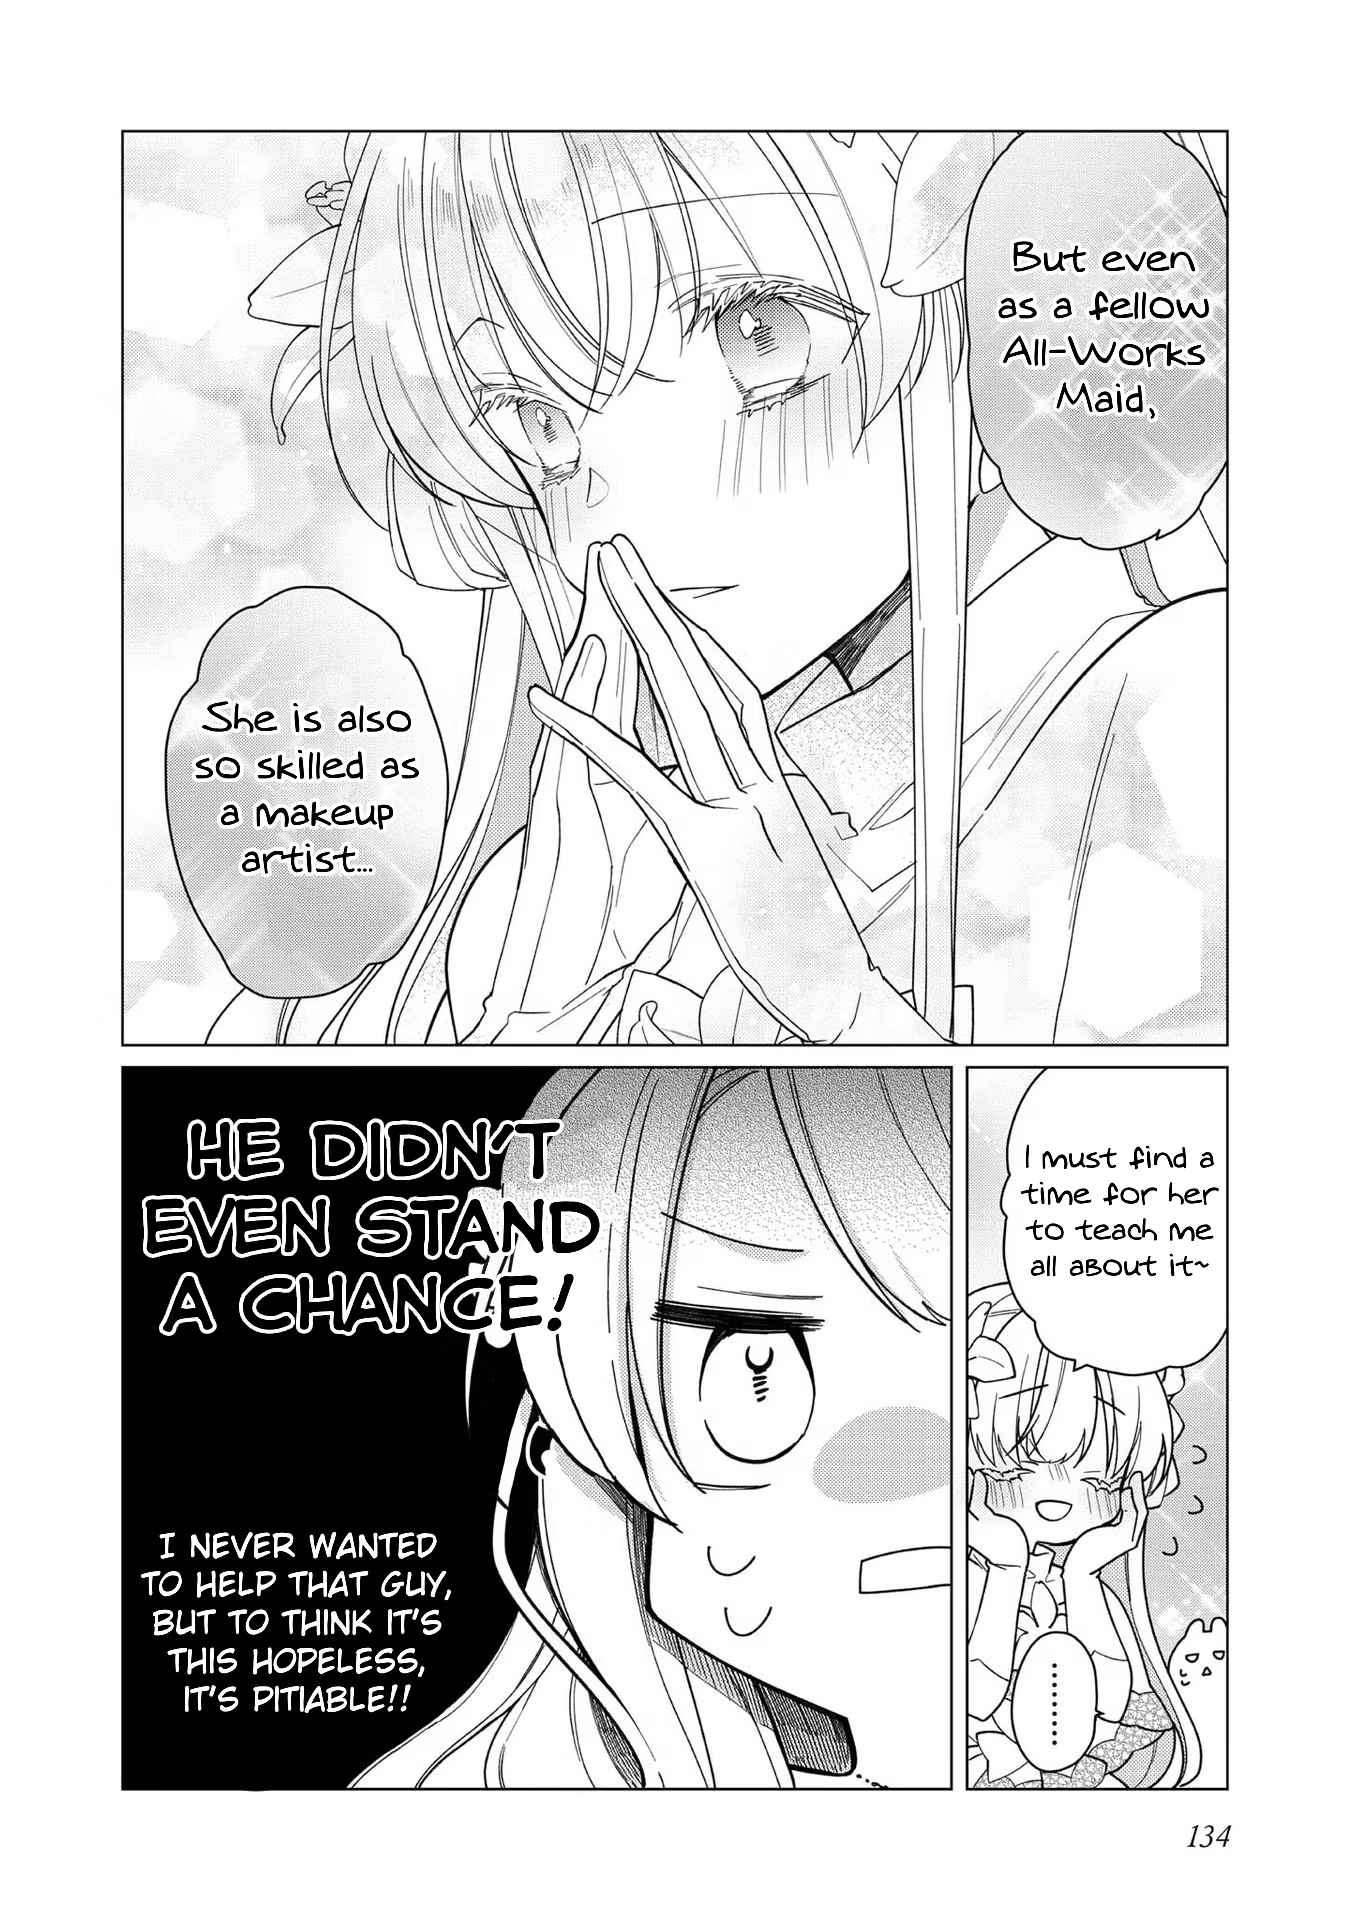 Heroine? Saint? No, I'm an All-Works Maid - chapter 10 - #6